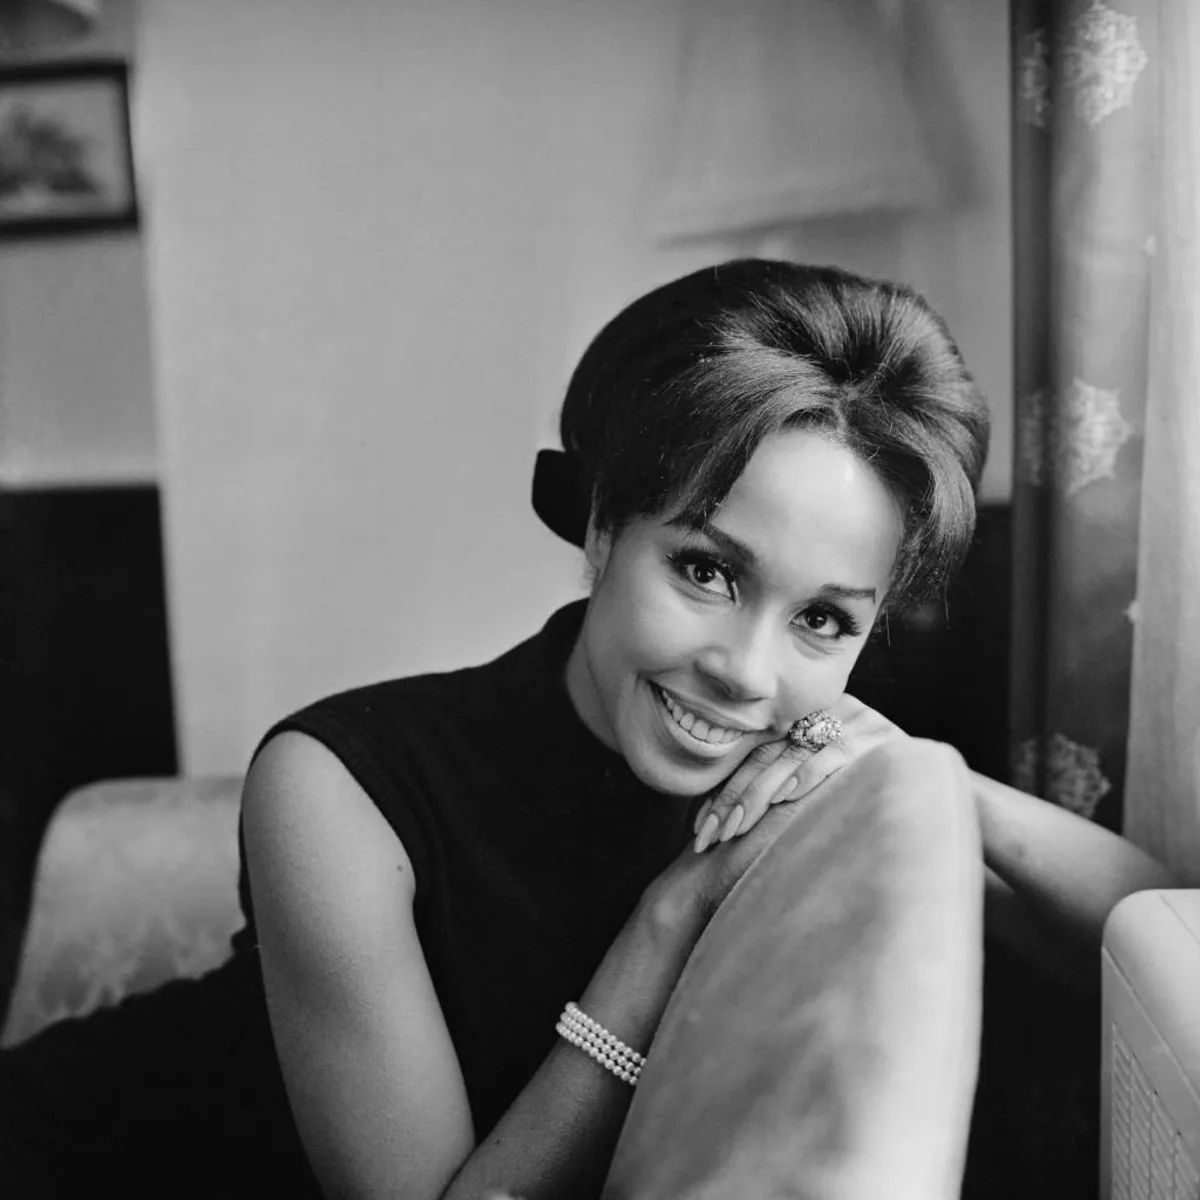 Diahann Carroll photographed in the UK, on January 18, 1965 | Photo: Getty Images